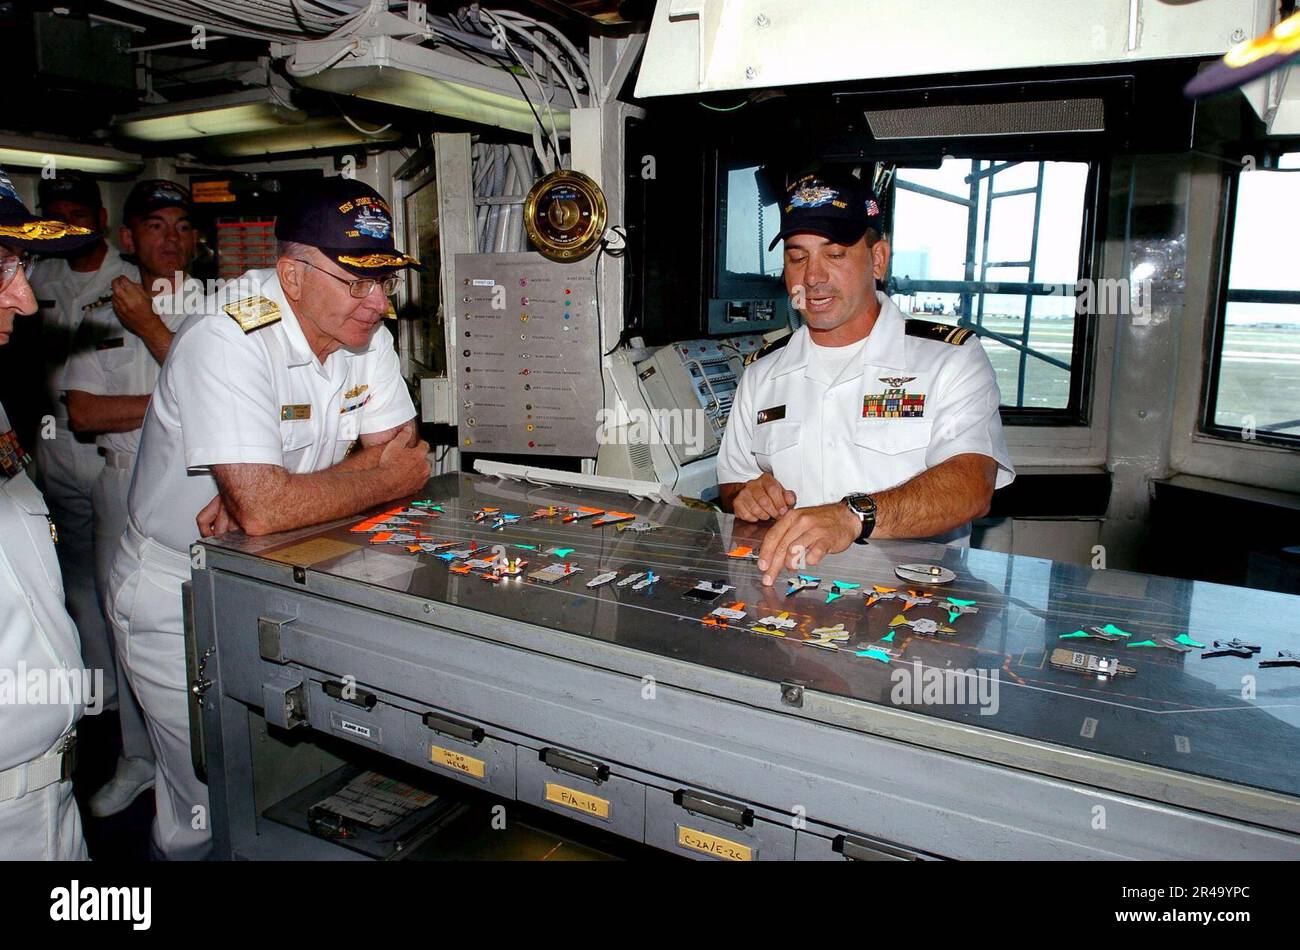 US Navy  Adm. Vern Clark, Chief of Naval Operations (CNO), looks on as Lt.j.g. demonstrates flight deck operating procedures in Flight Deck Control. Stock Photo